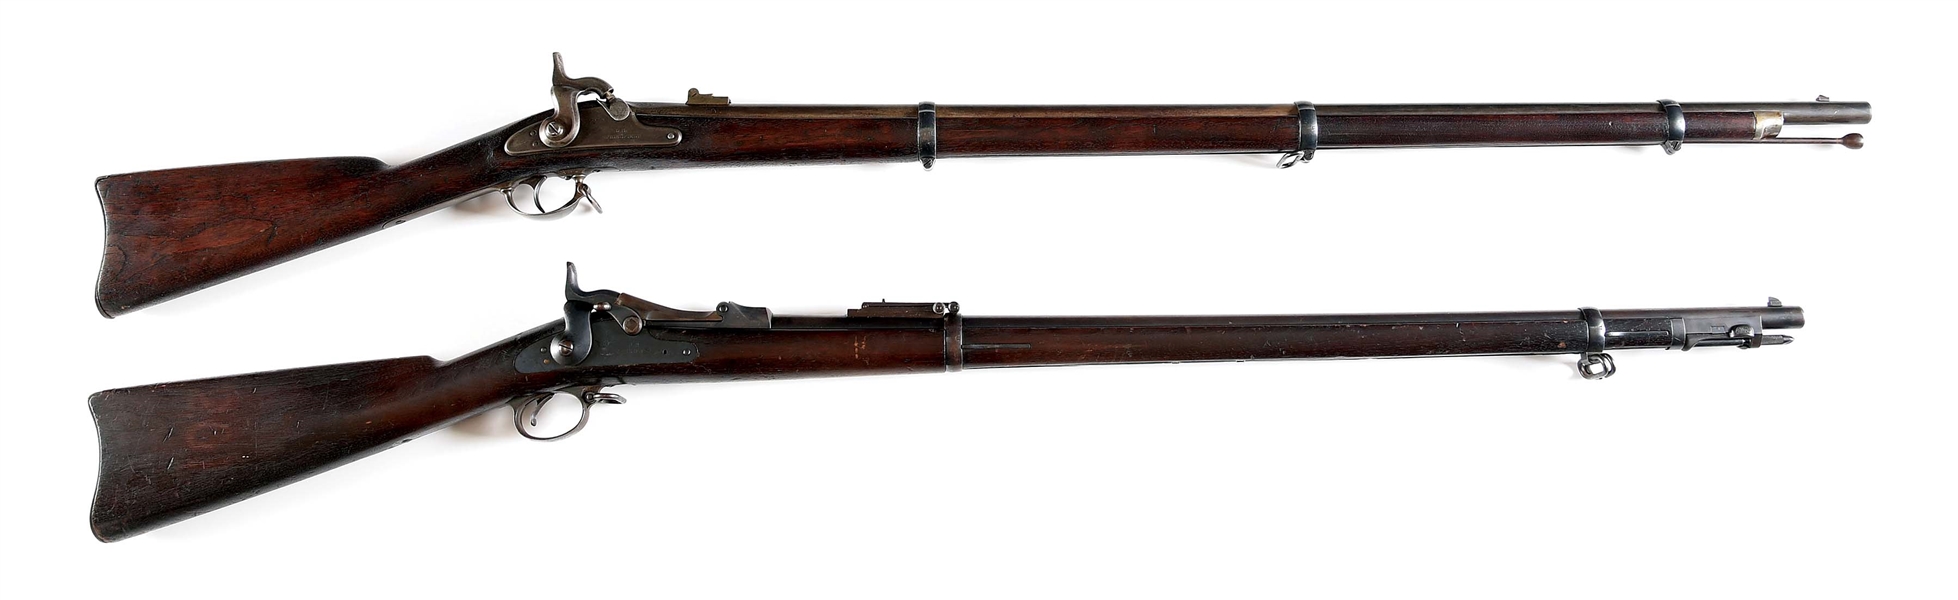 (A) LOT OF 2: SPRINGFIELD MODEL 1863 PERCUSSION RIFLE AND MODEL 1888 TRAPDOOR SINGLE SHOT RIFLE  